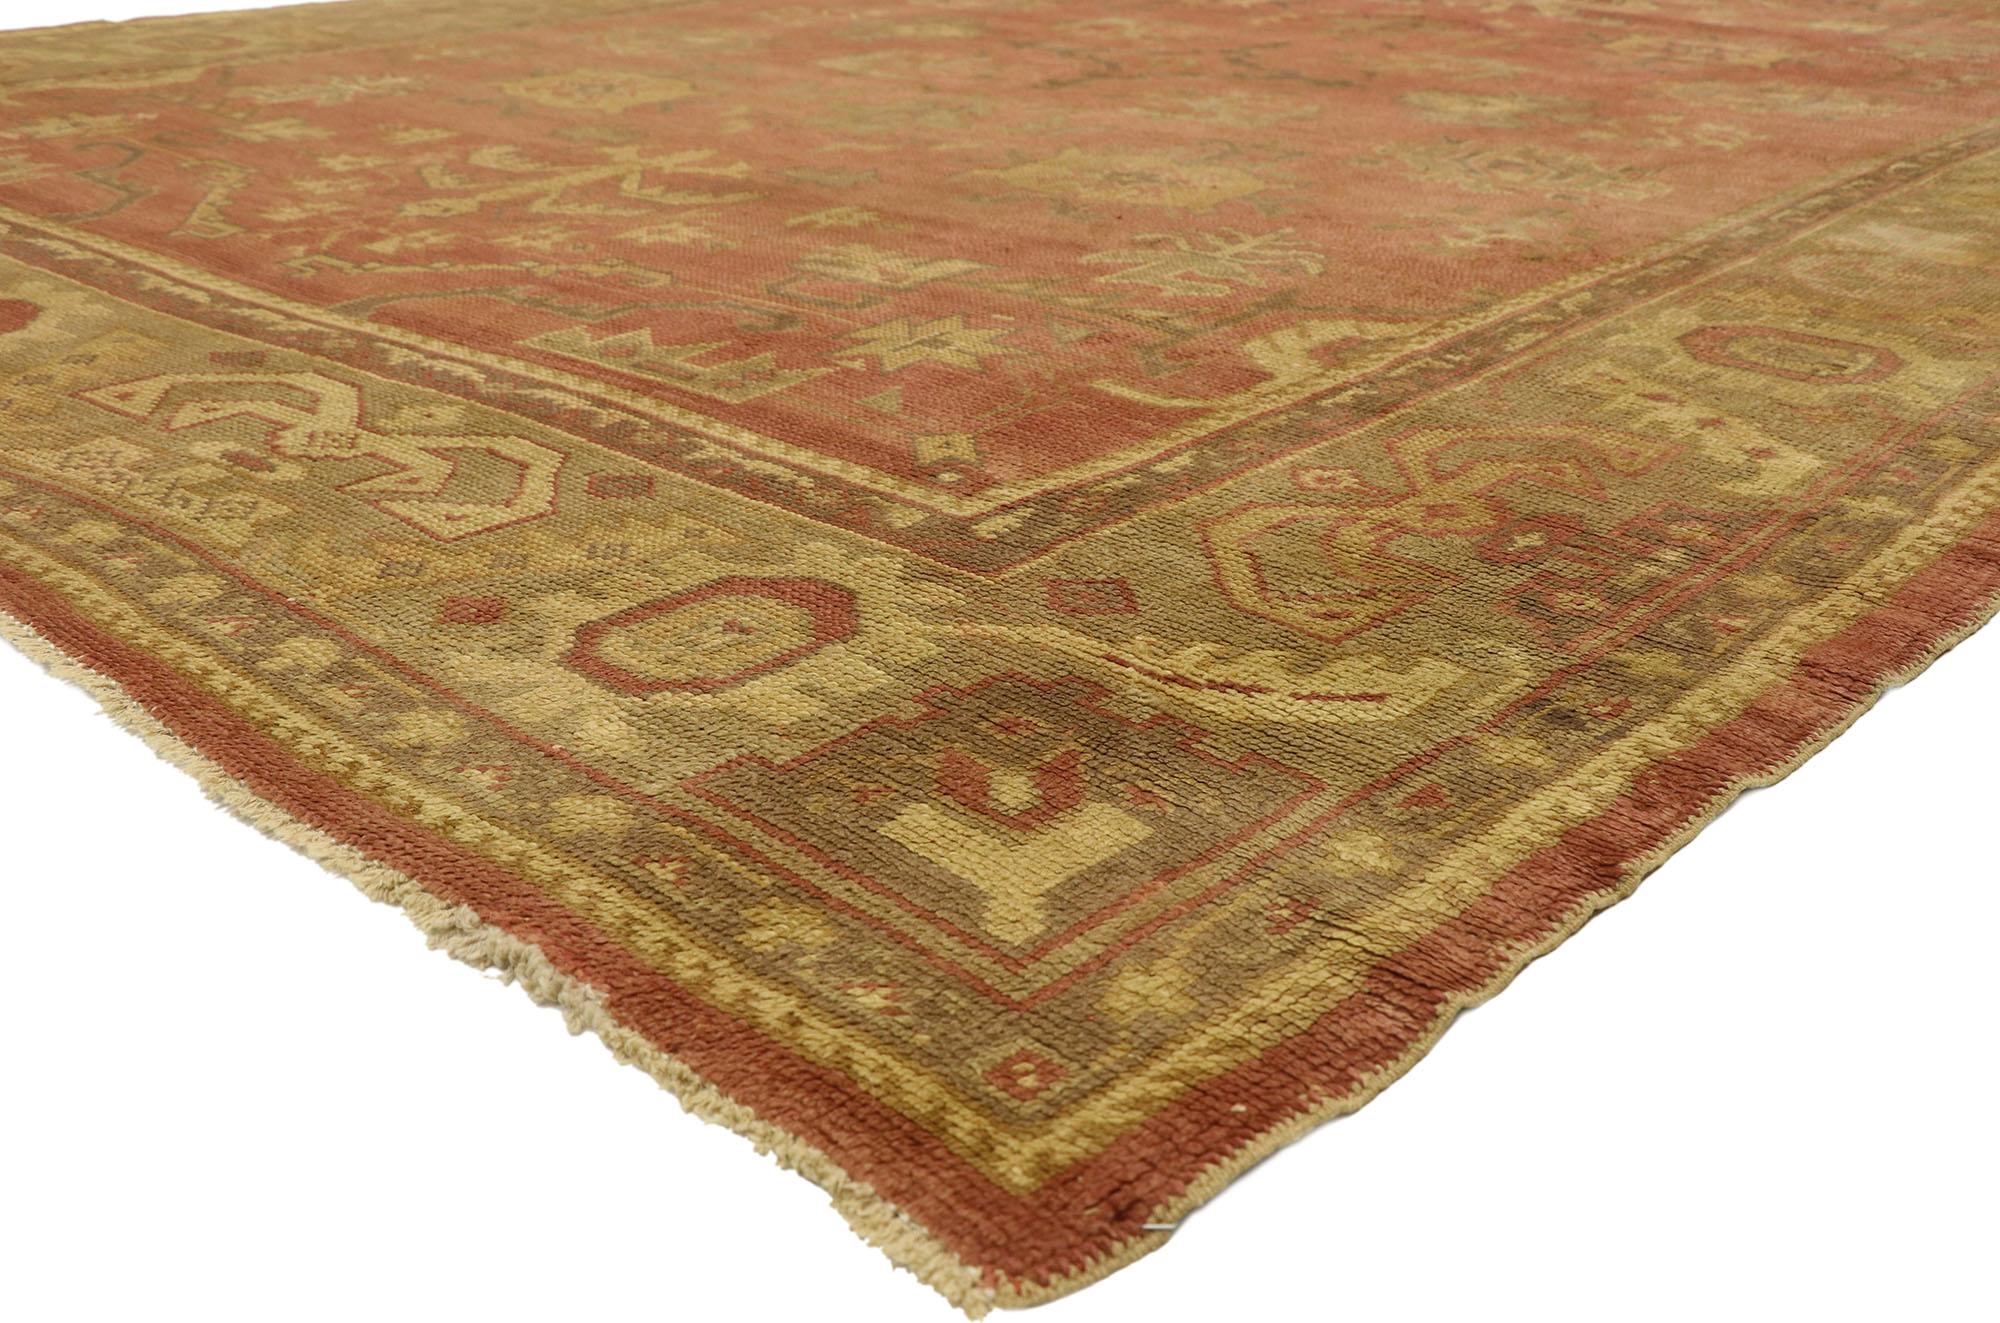 73592 Antique Turkish Oushak Rug with Rustic Belgian Arts and Crafts Style. Highlighting modern design aesthetics and understated elegance with subdued color, this hand knotted wool antique Turkish Oushak rug beautifully embodies rustic Belgian